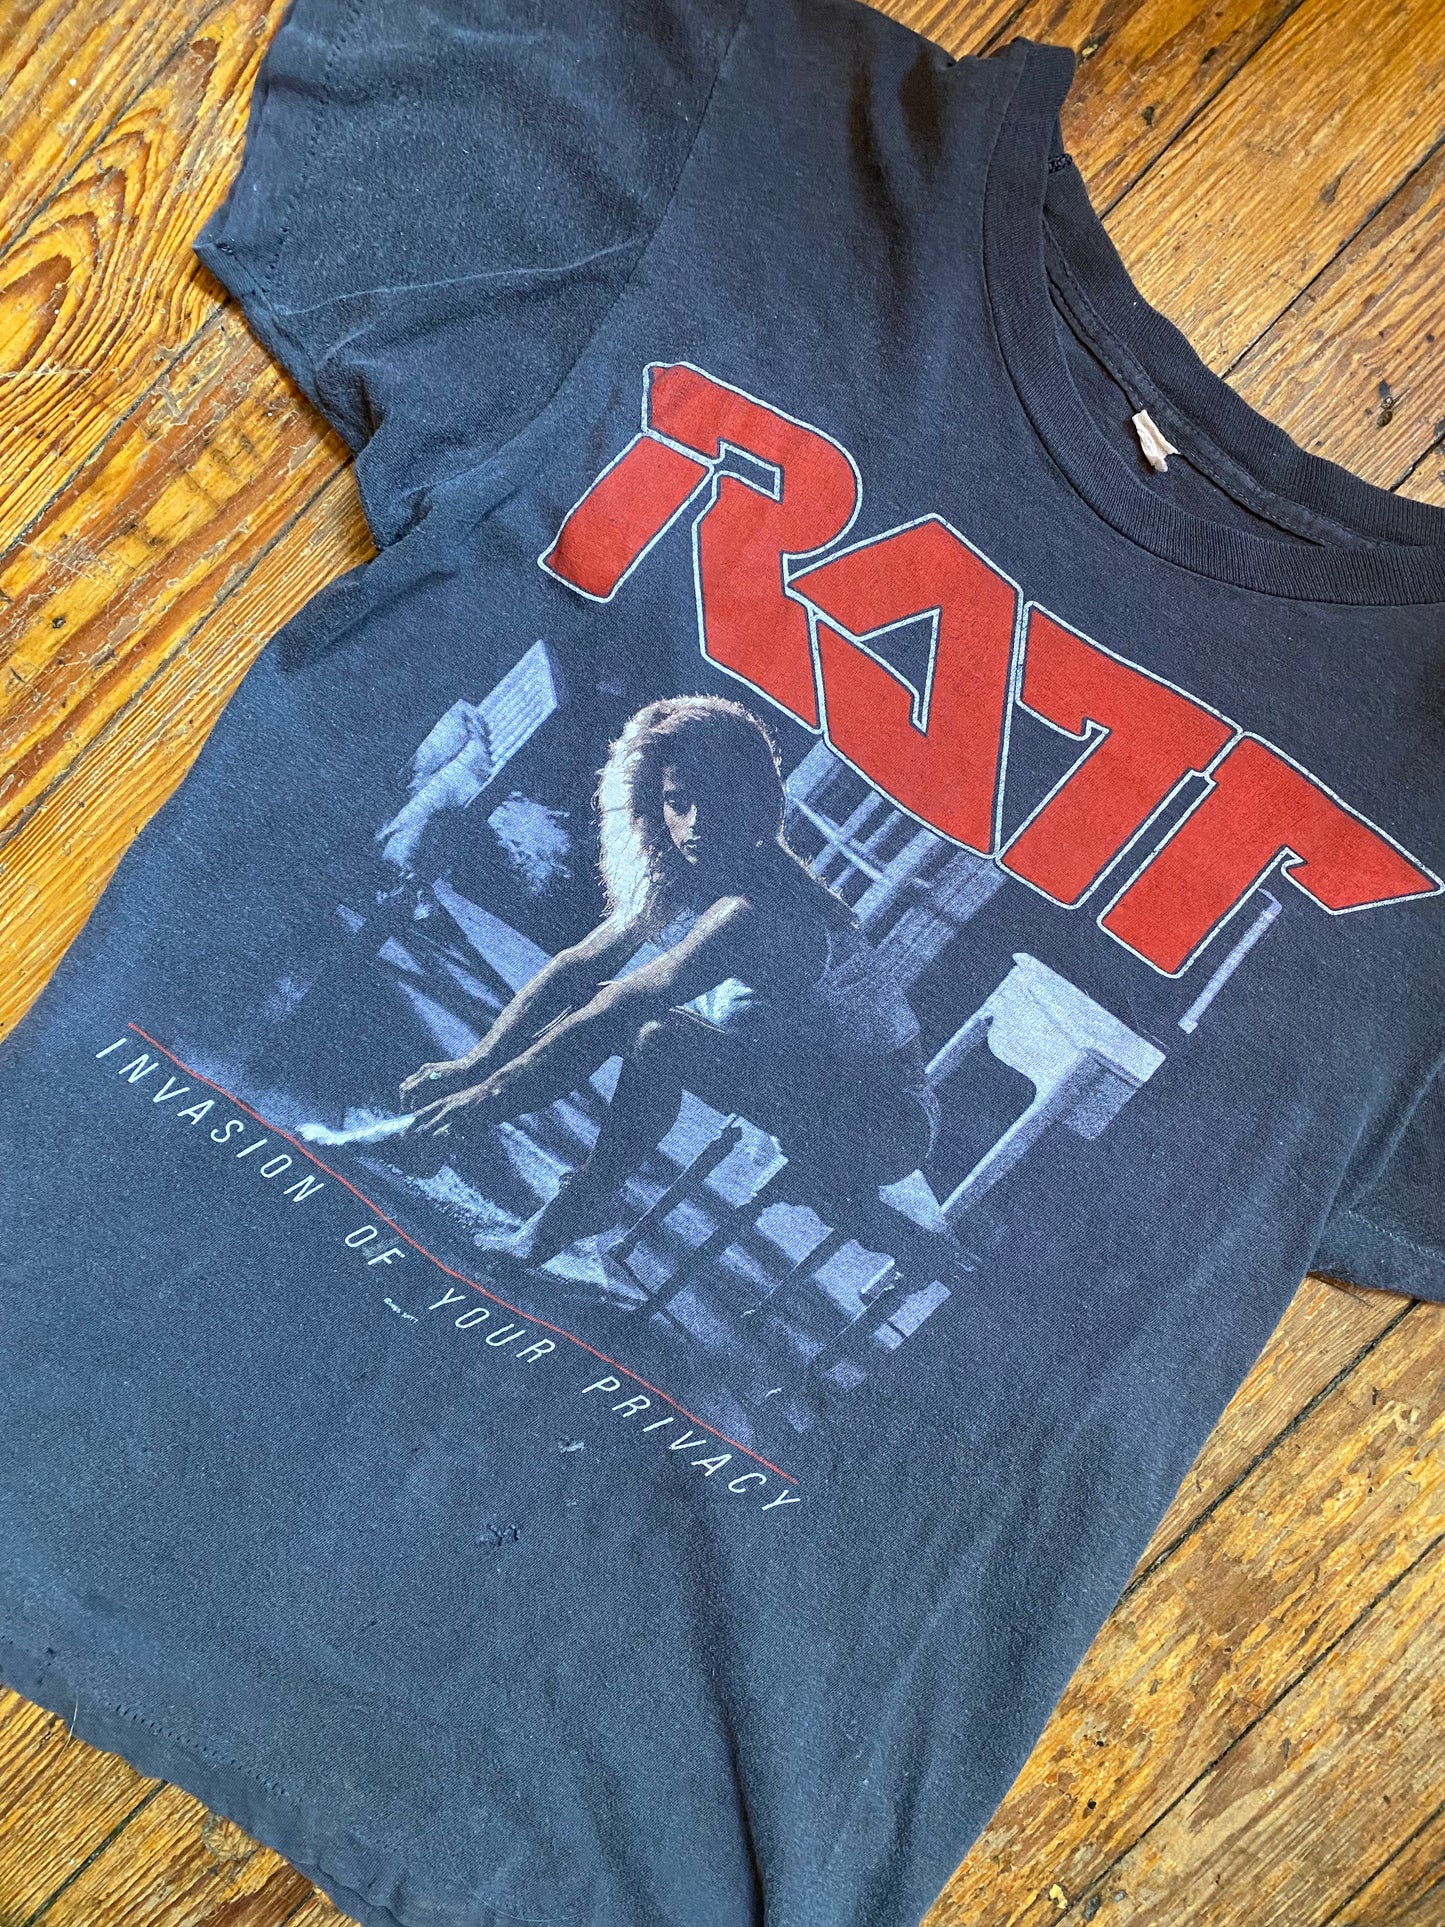 Vintage 1985 Ratt “Invasion of Your Privacy” Shirt